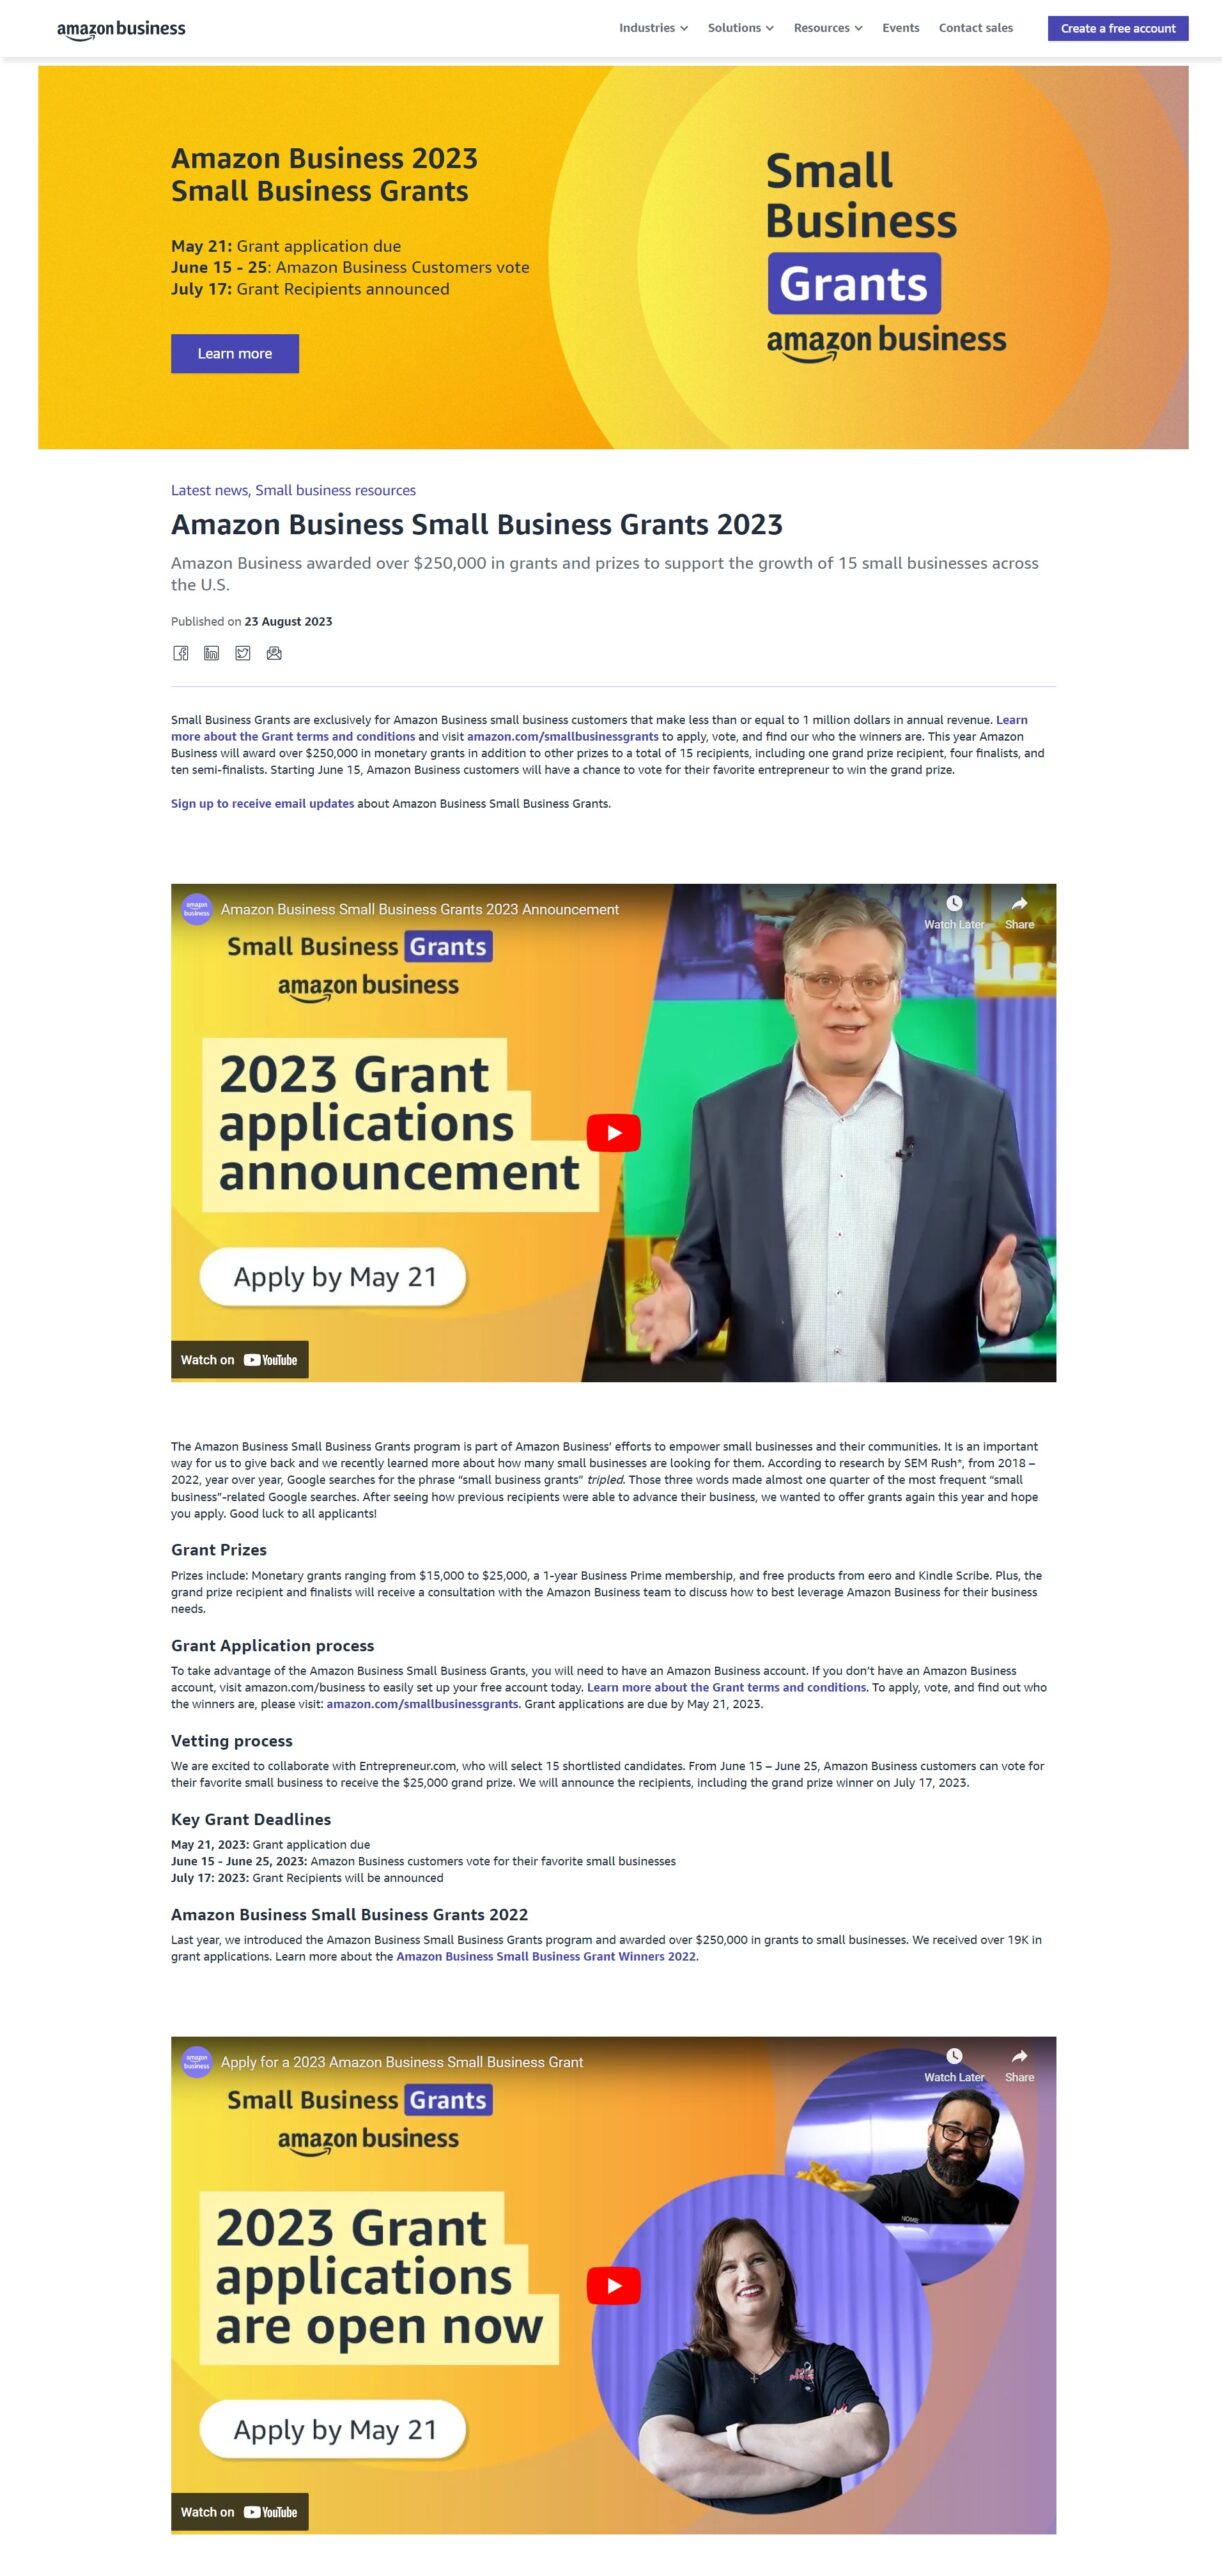 Amazon Business Small Business Grants